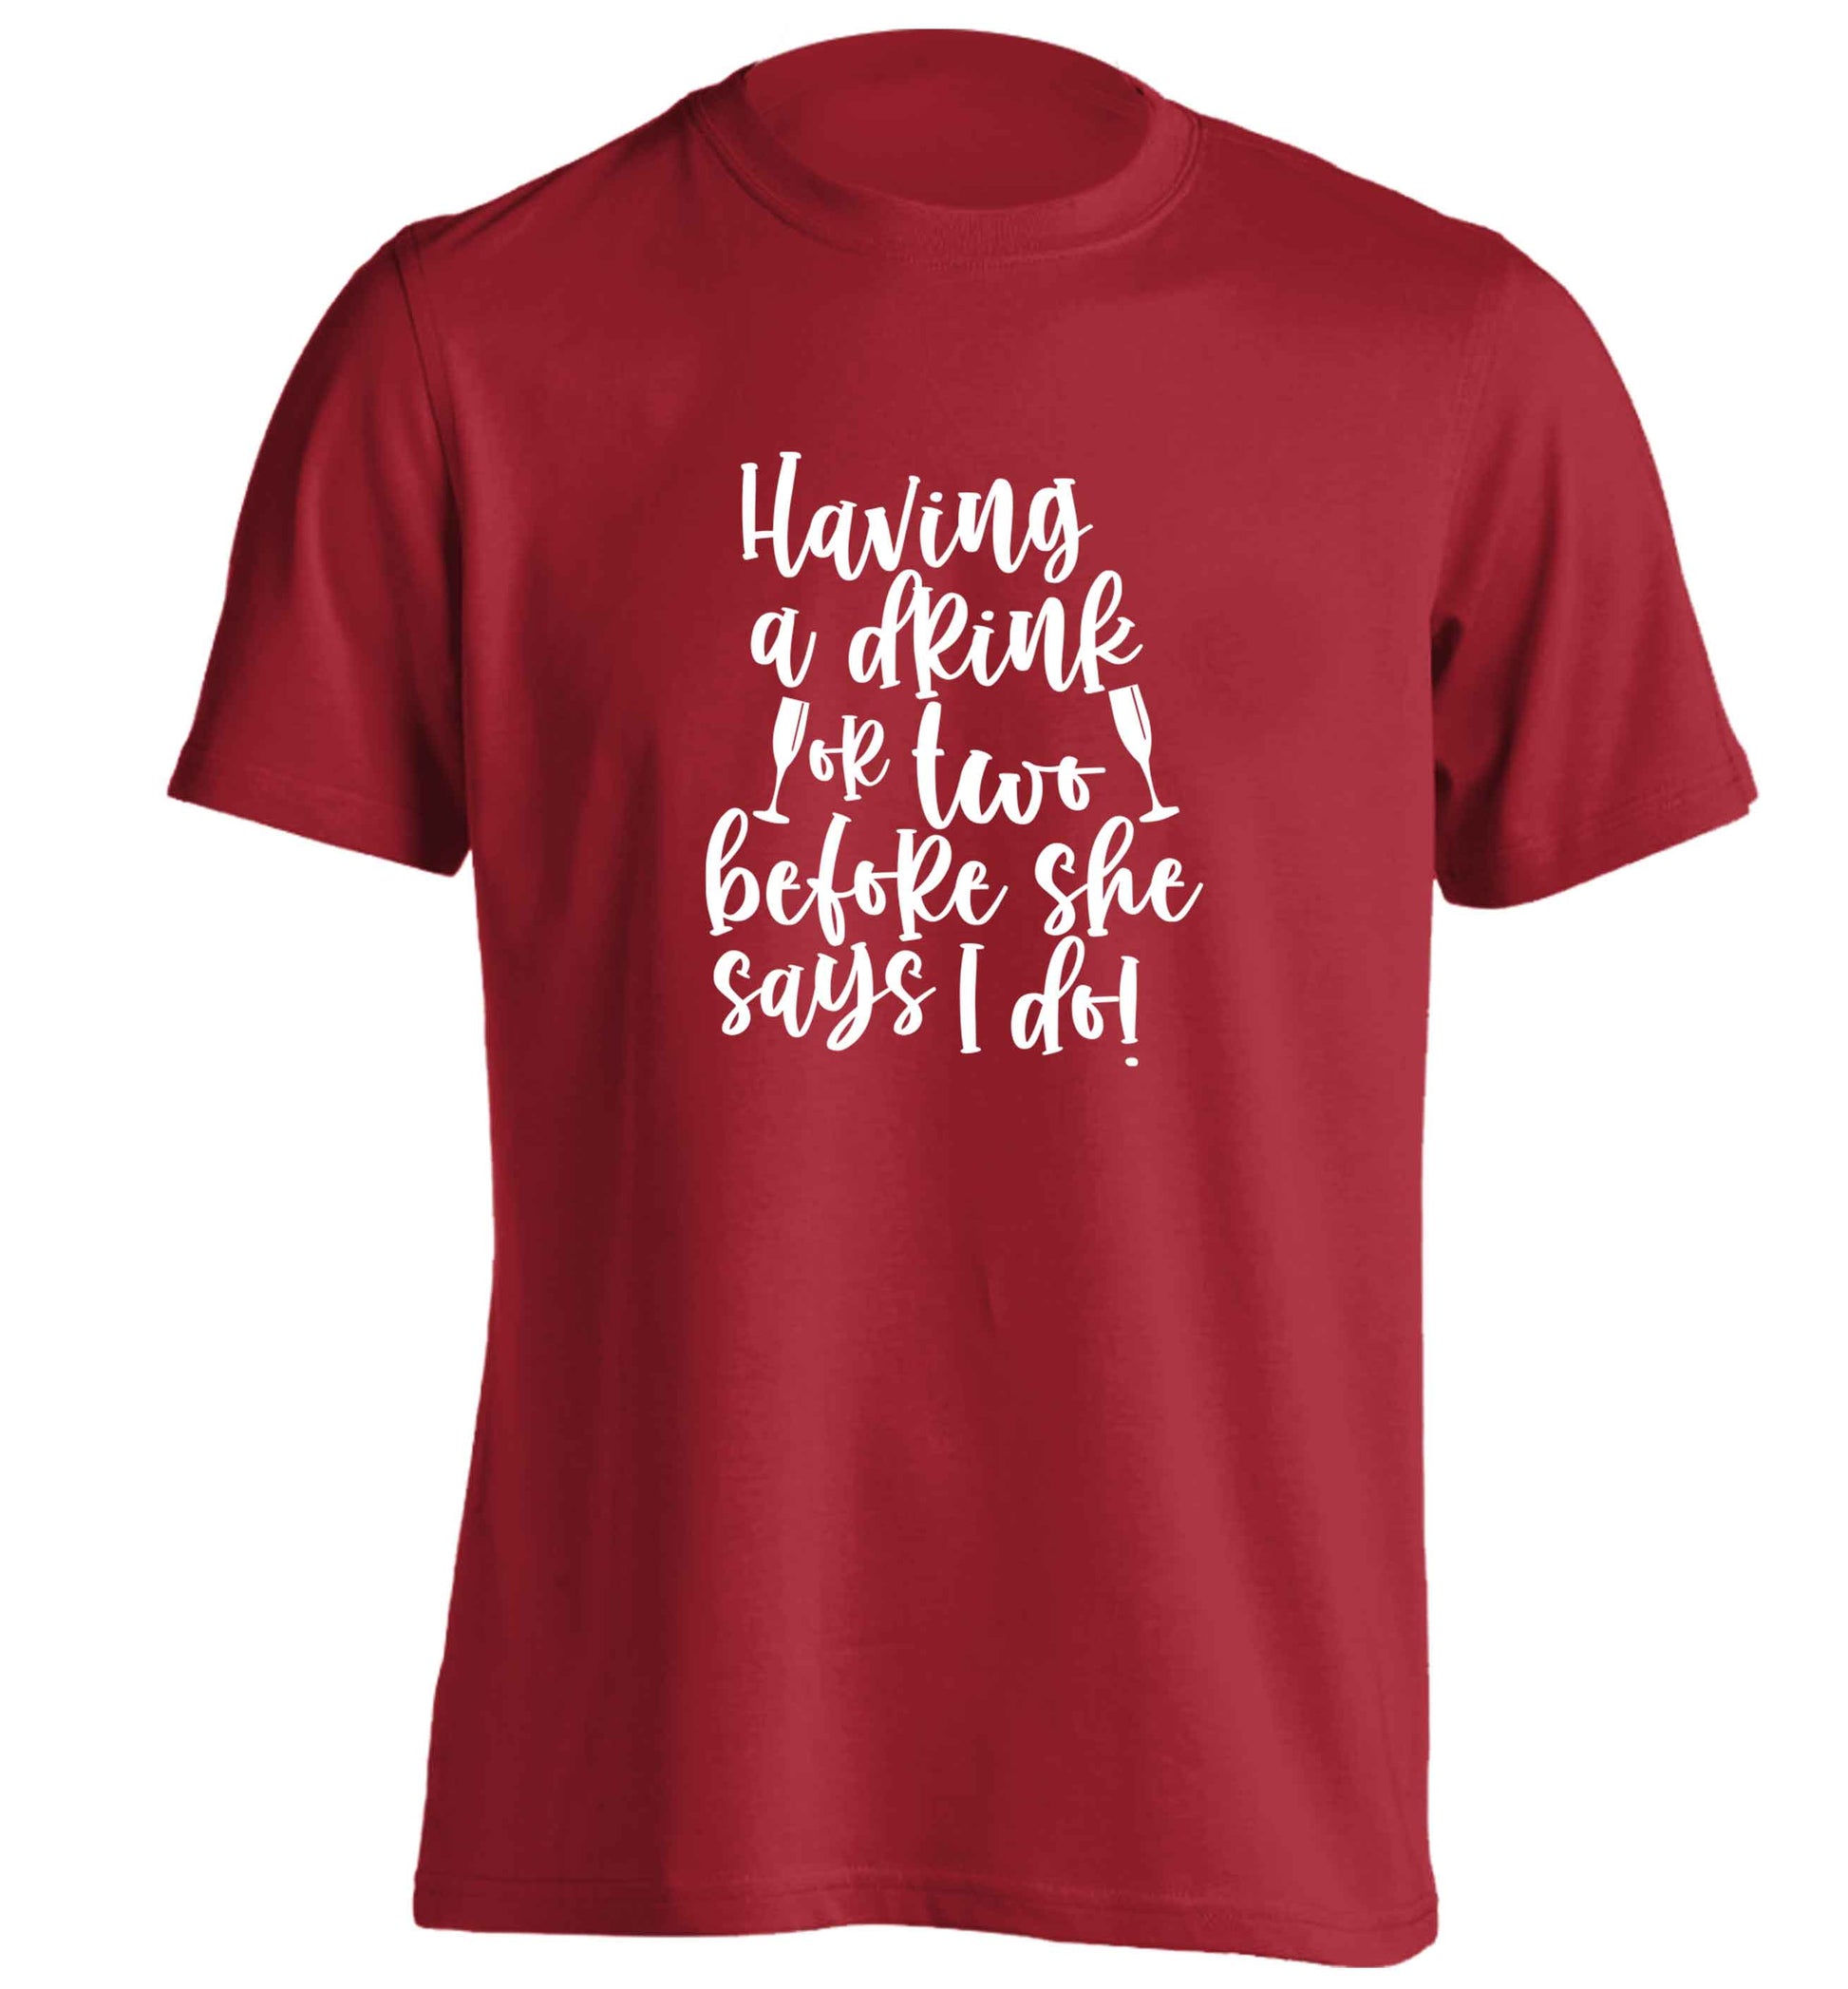 Having a drink or two before she says I do adults unisex red Tshirt 2XL